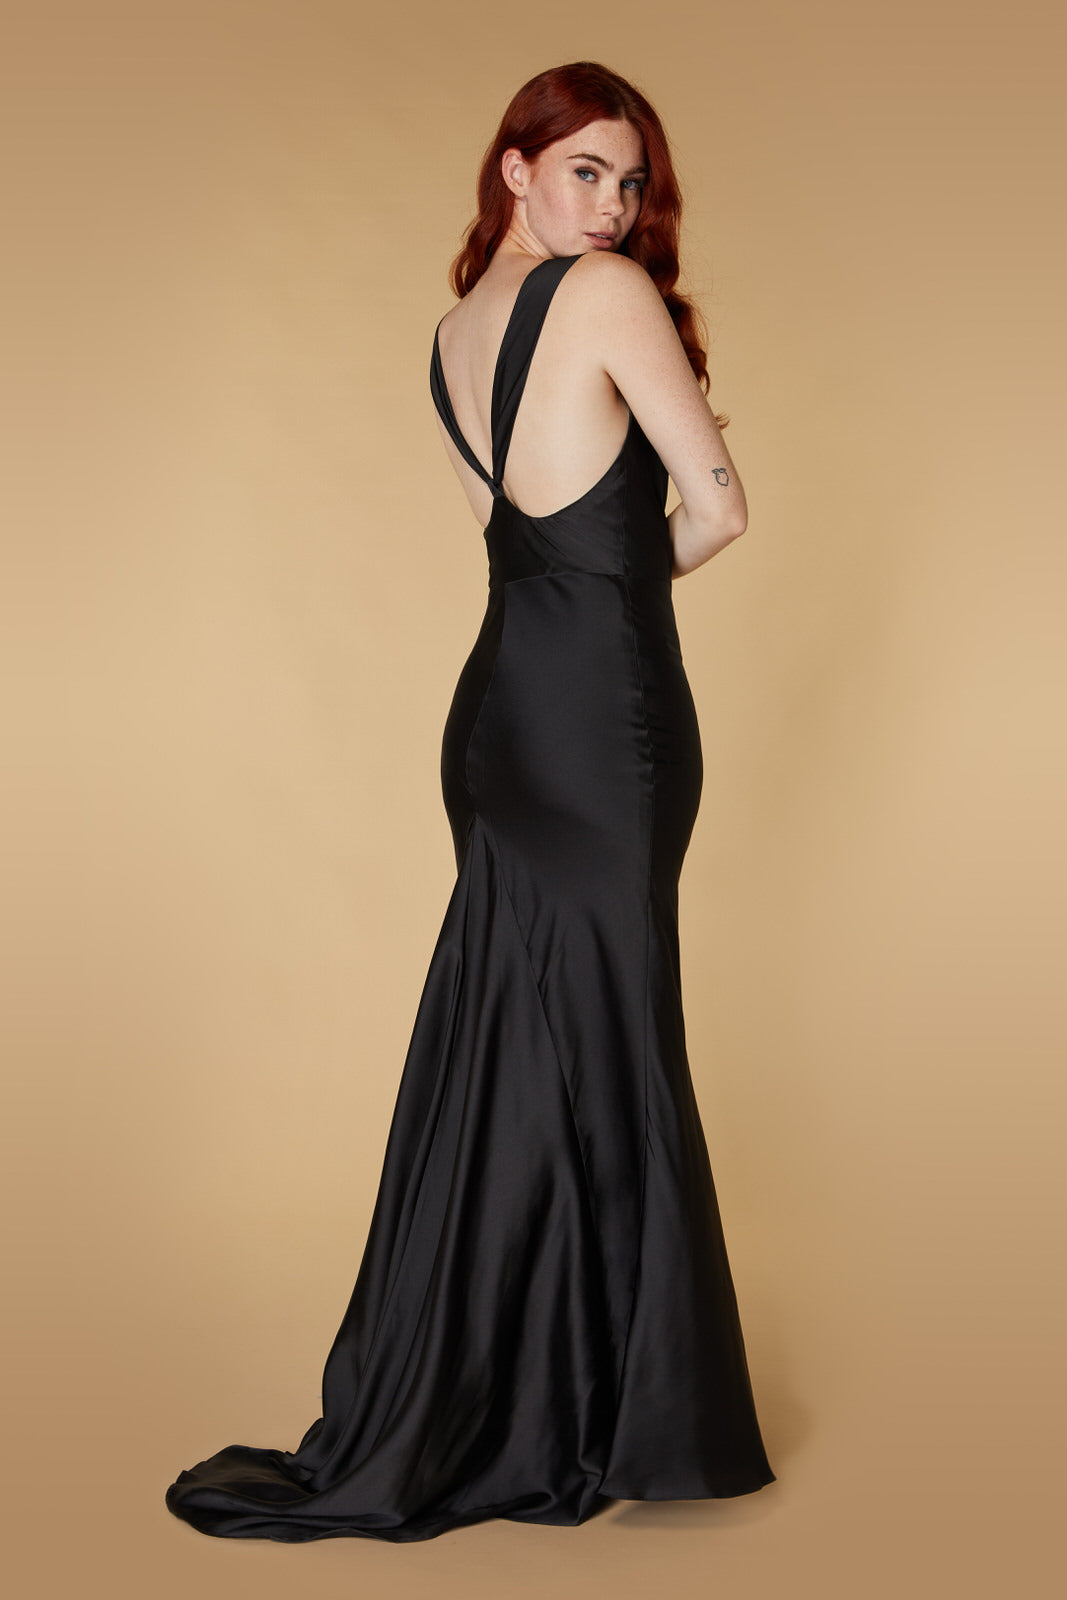 Mika Cowl Front Maxi Dress With Strappy Back Detail, UK 8 / US 4 / EU 36 / Black